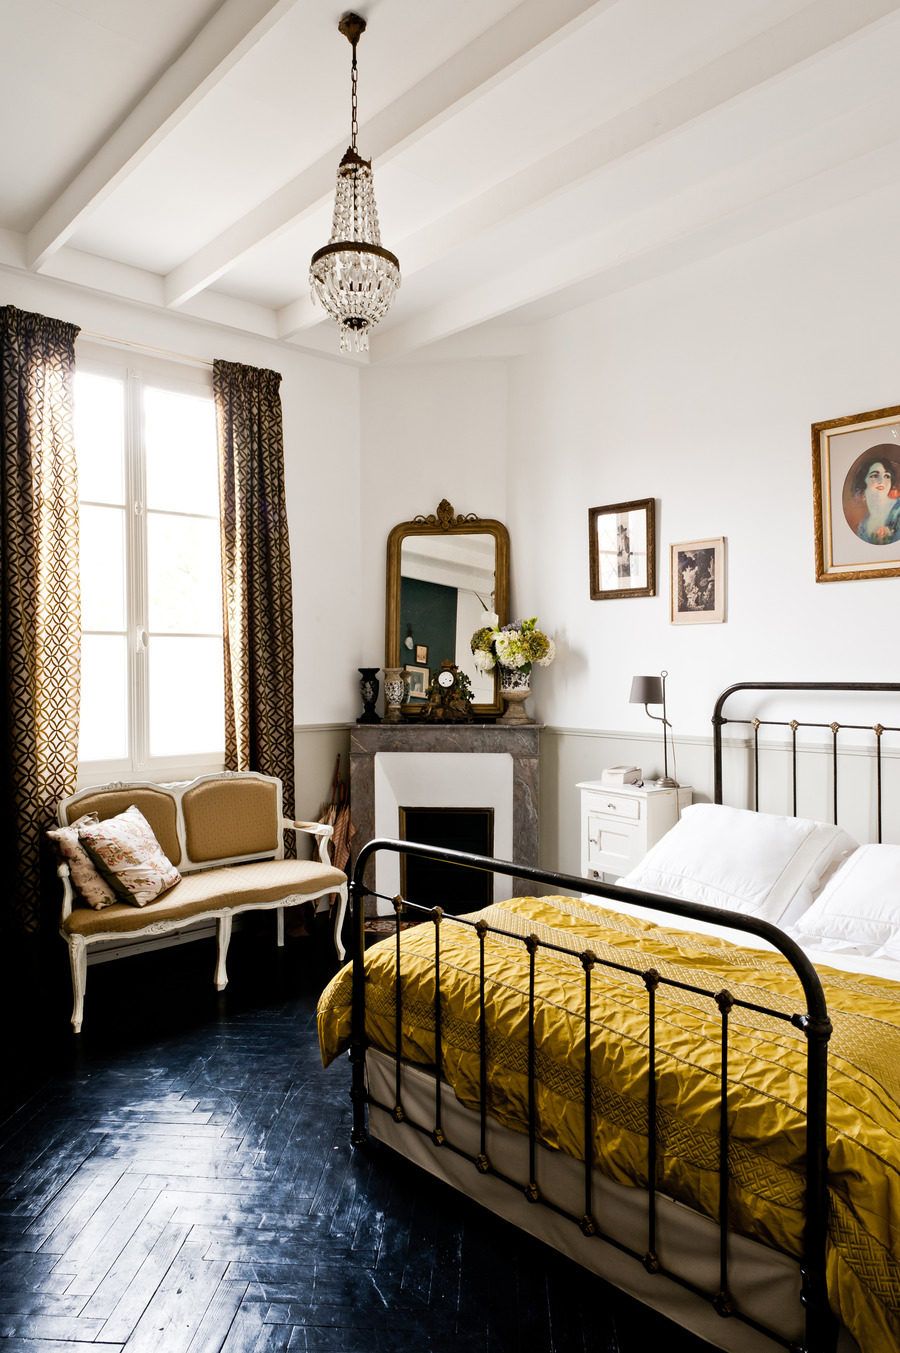 French country bedroom with Black Iron Bed via SMP Julien Fernandez